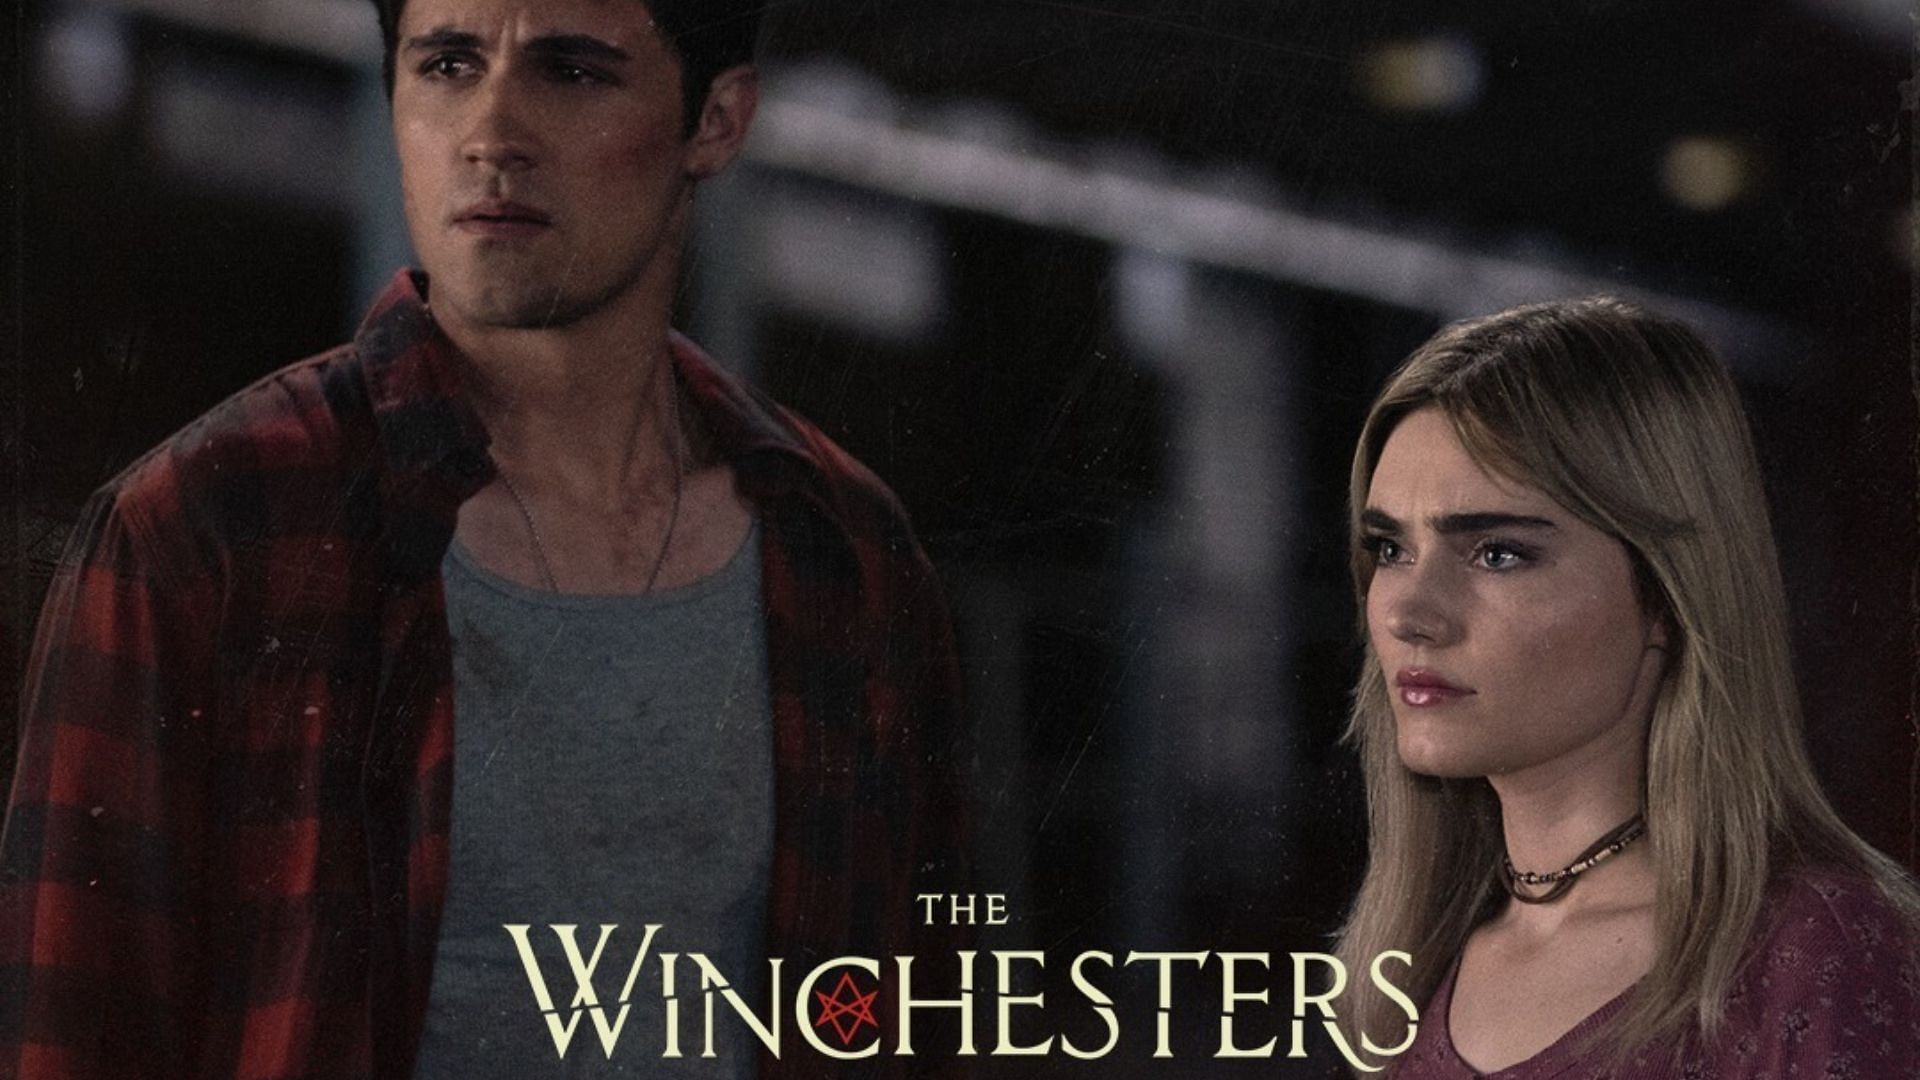 The Winchesters (Image via @thecwwinchesters/ Instagram)